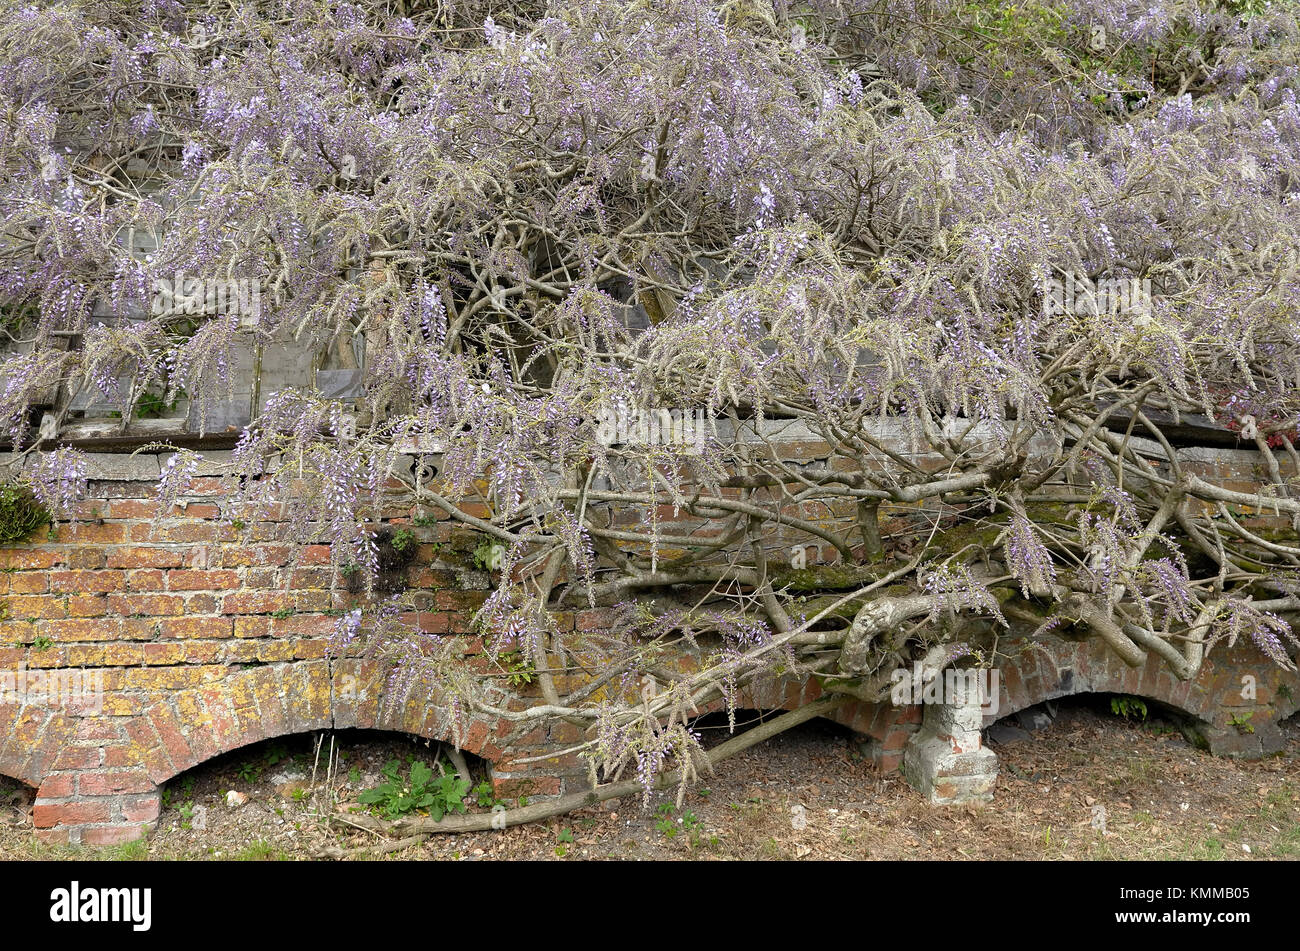 Wisteria creeping over Victorian glasshouse with ventilation arches built into the brickwork base Stock Photo